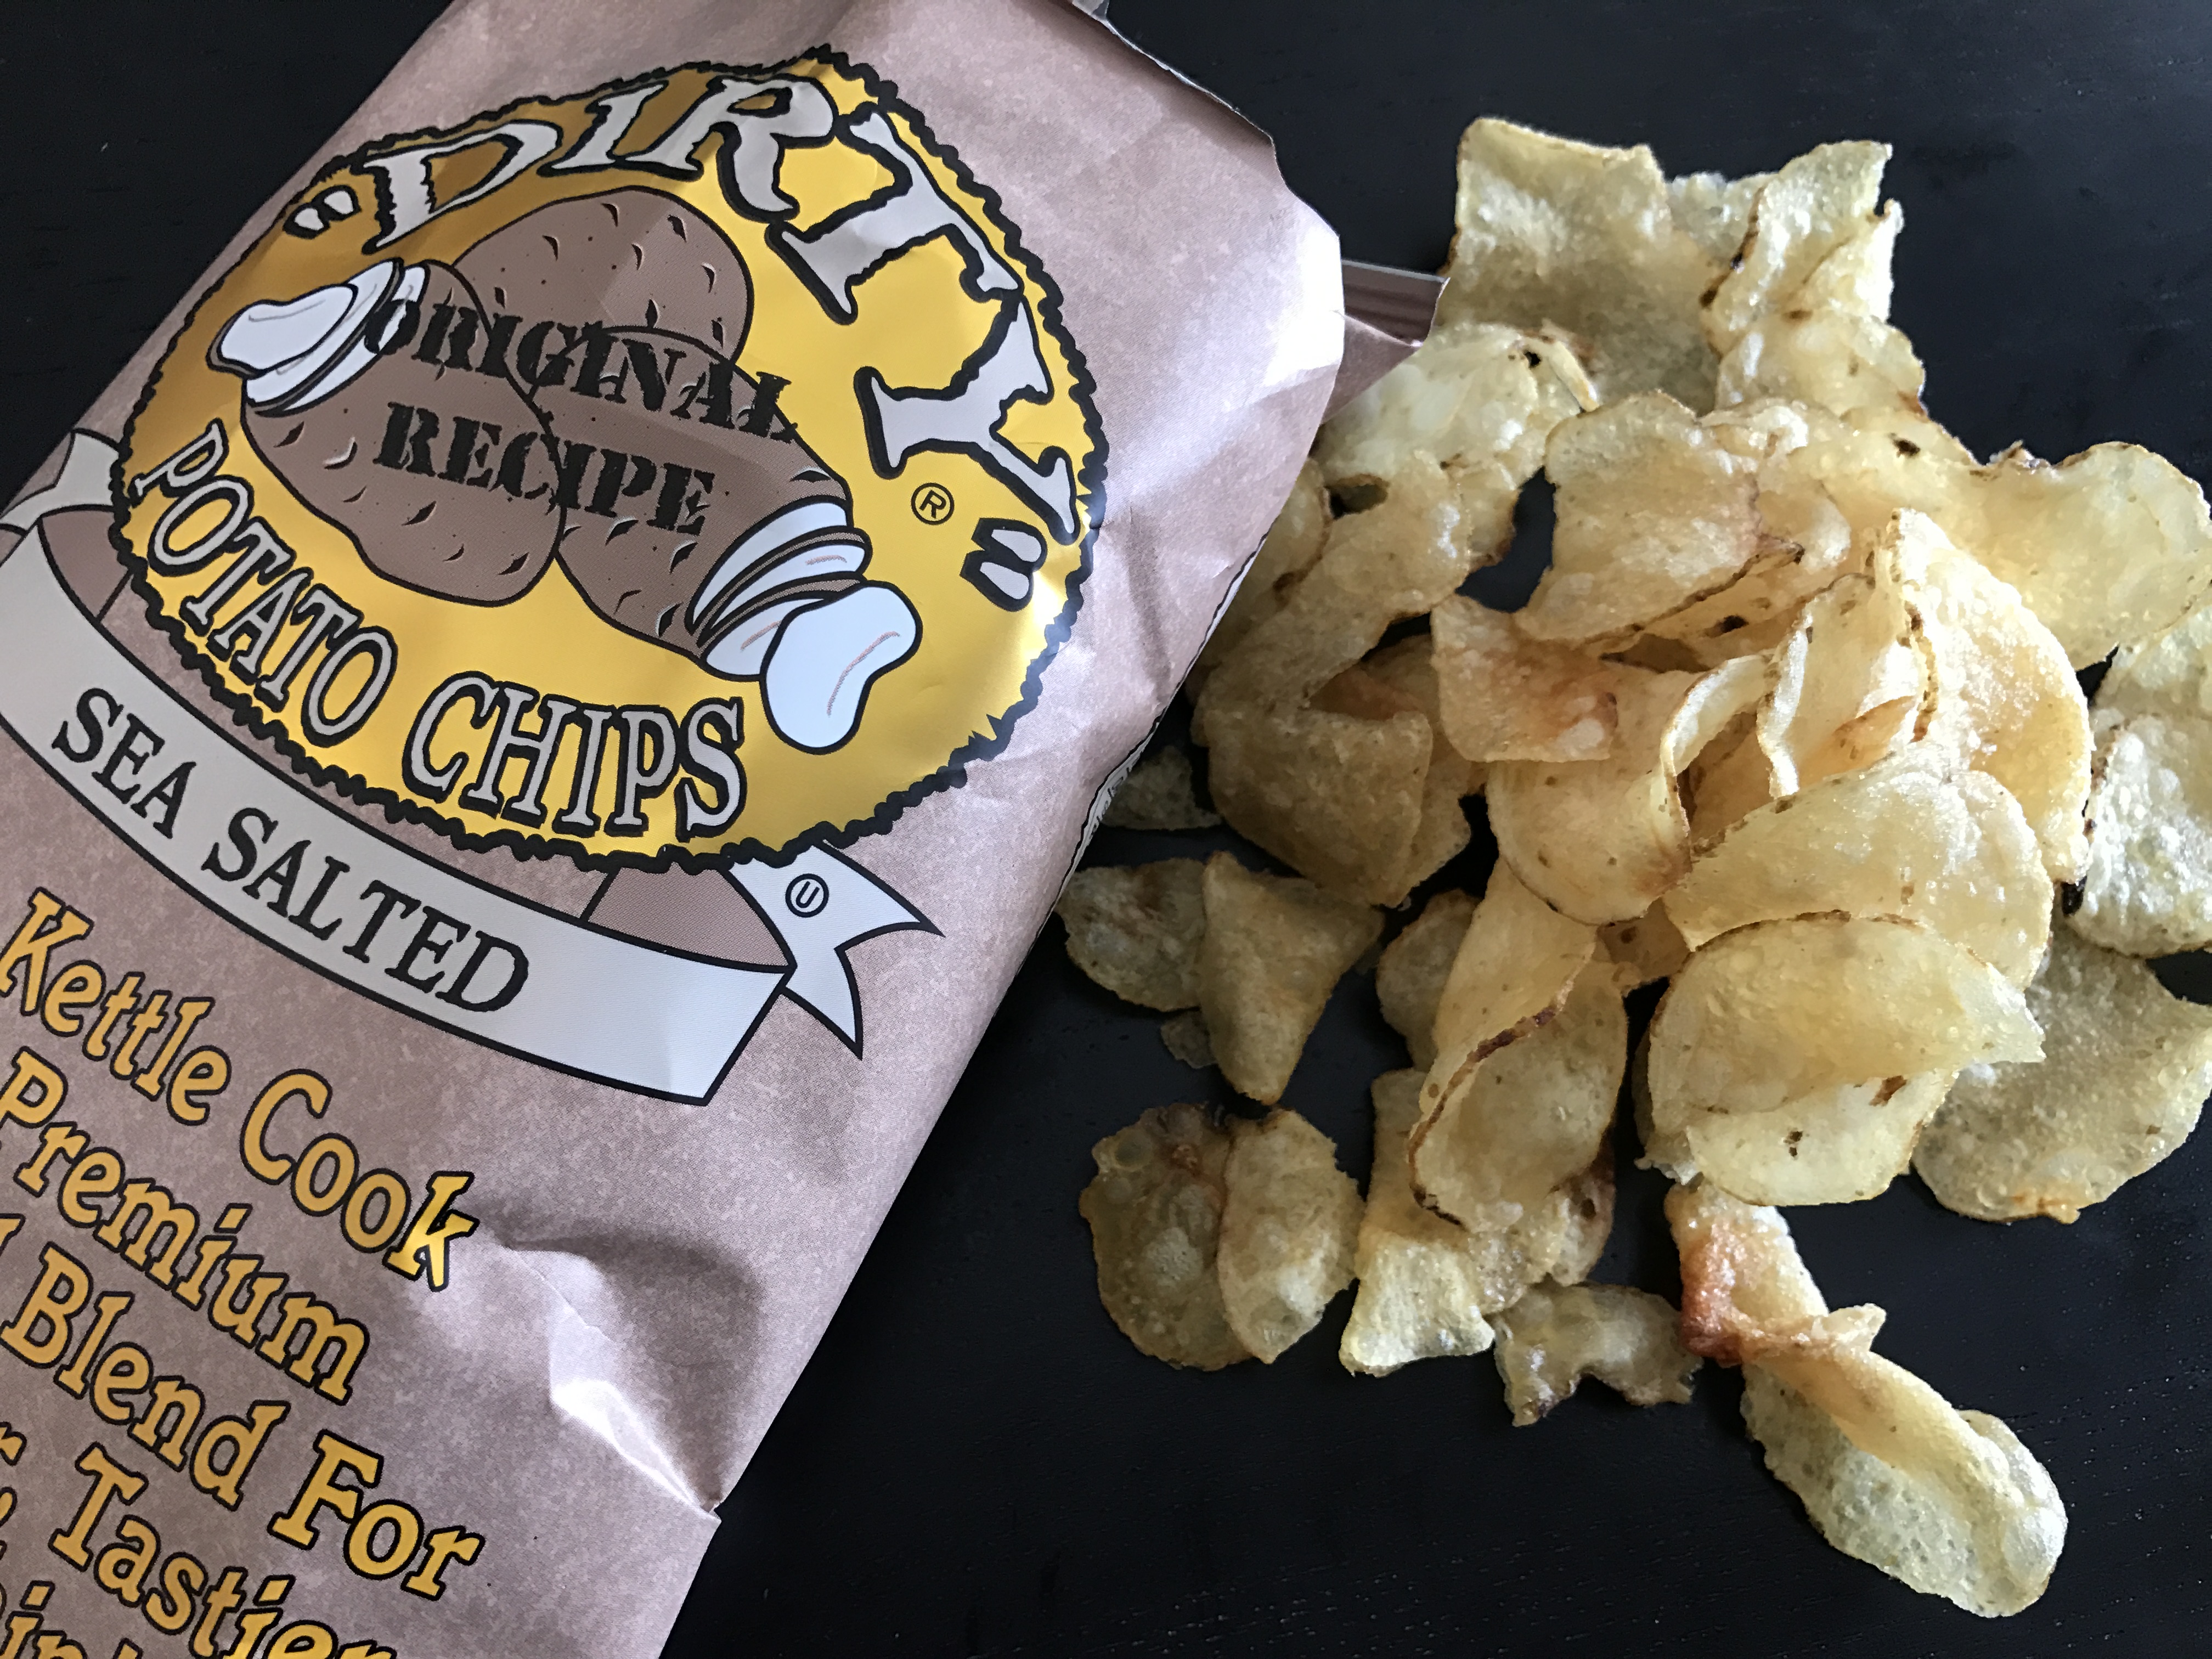 A Definitive Ranking of Kettle Chip Flavors